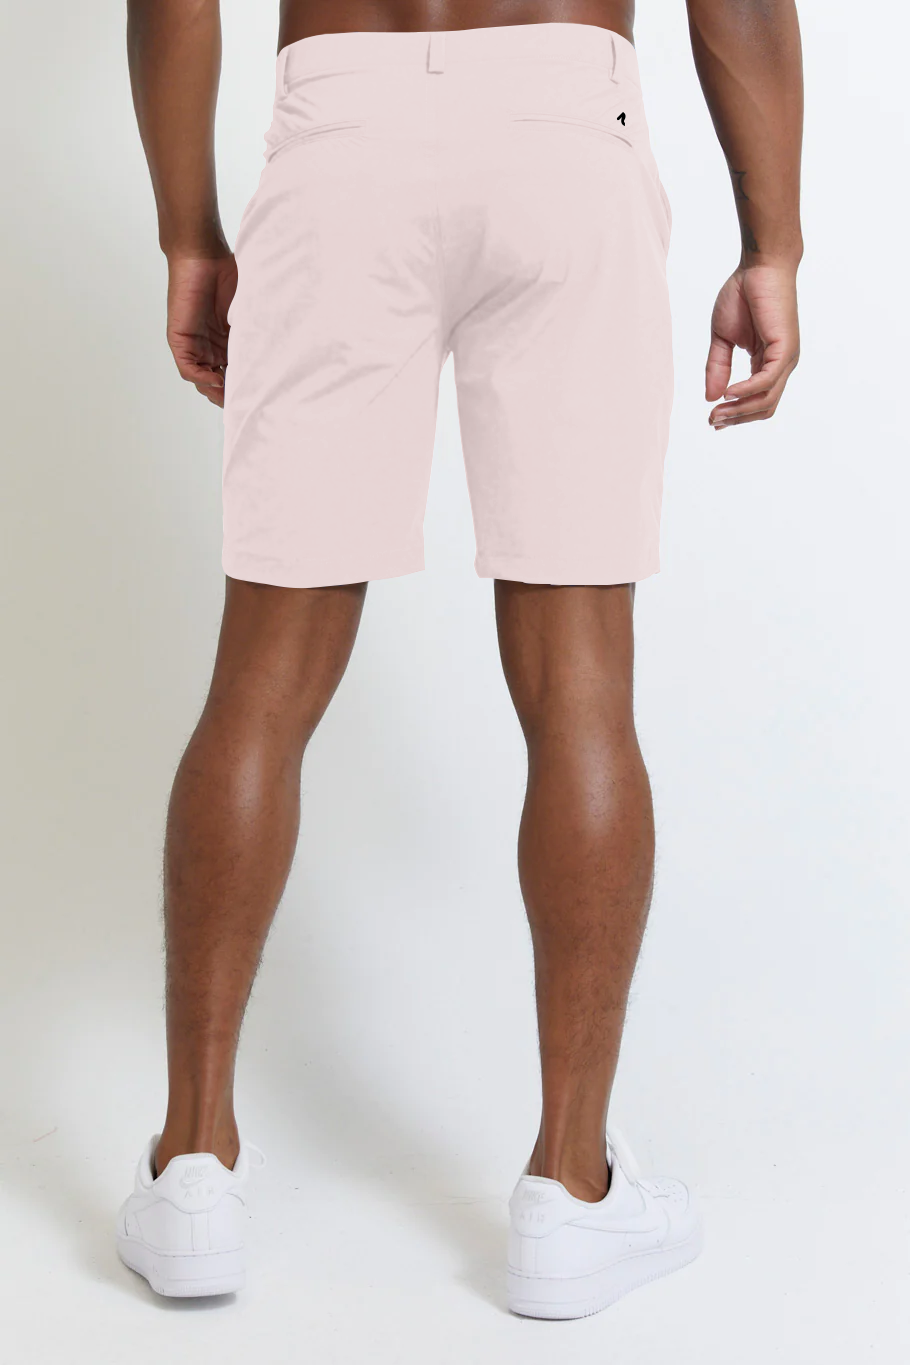 Image of the hanover pull-on short in petal pink